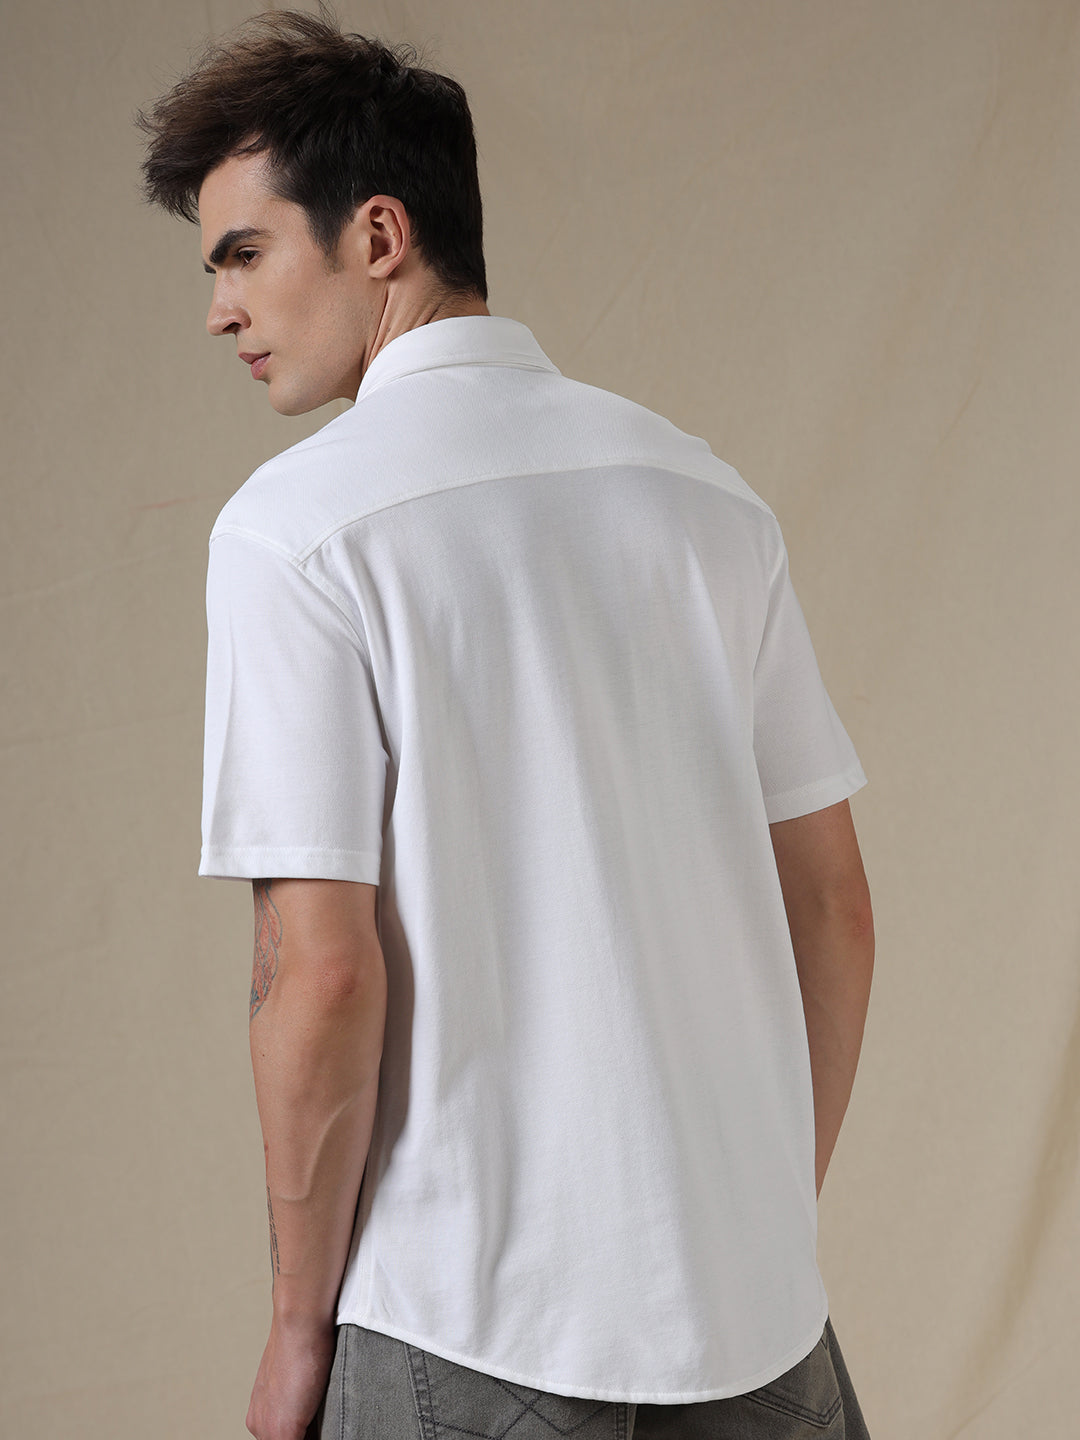 Solid Heavy Knit White hirt